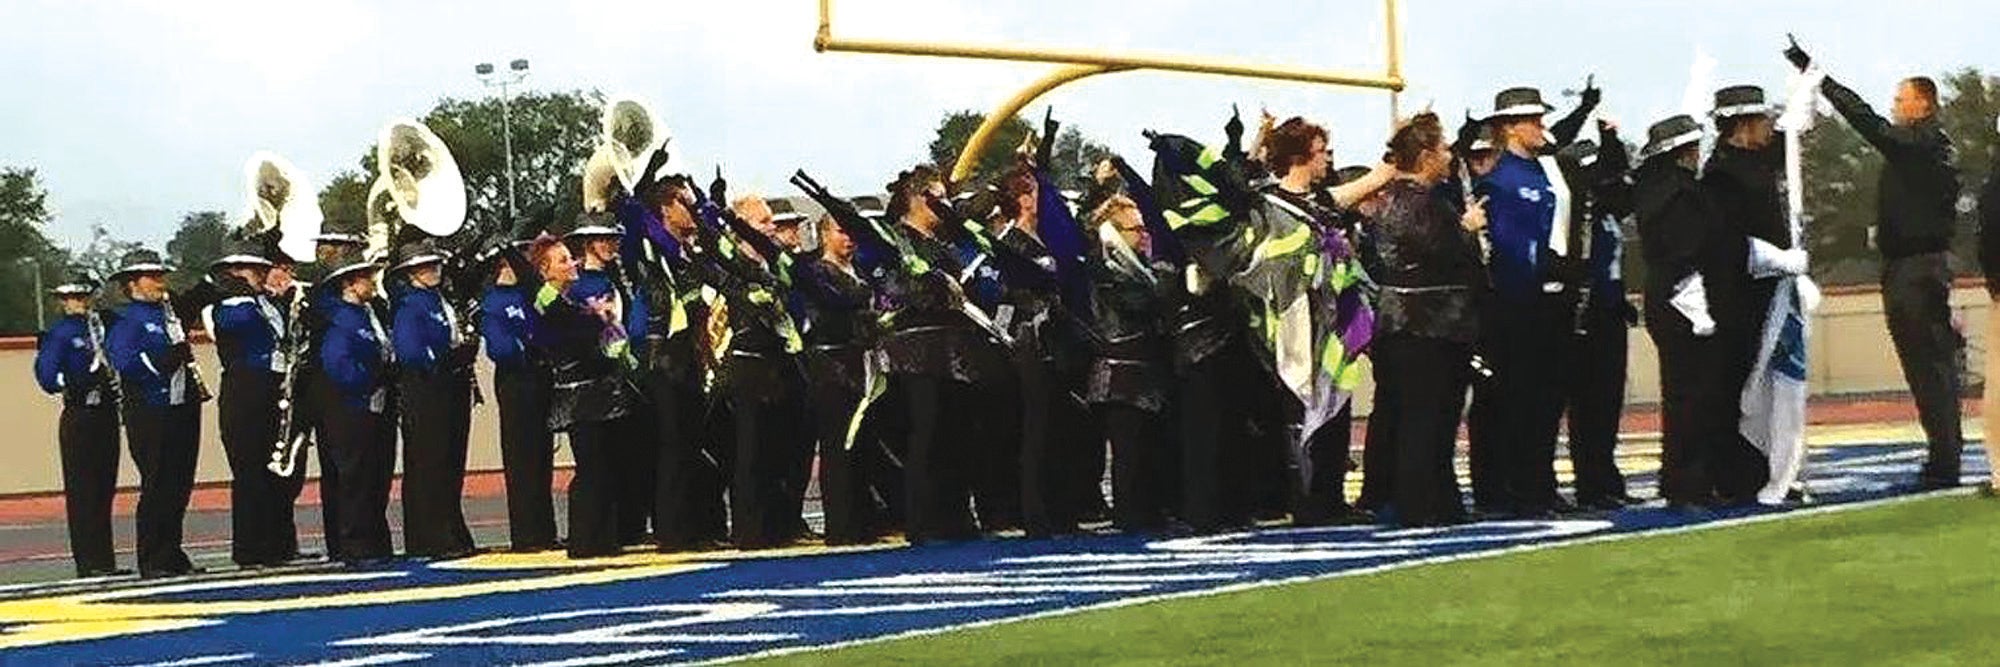 East Jessamine band marching to nationals Jessamine Journal